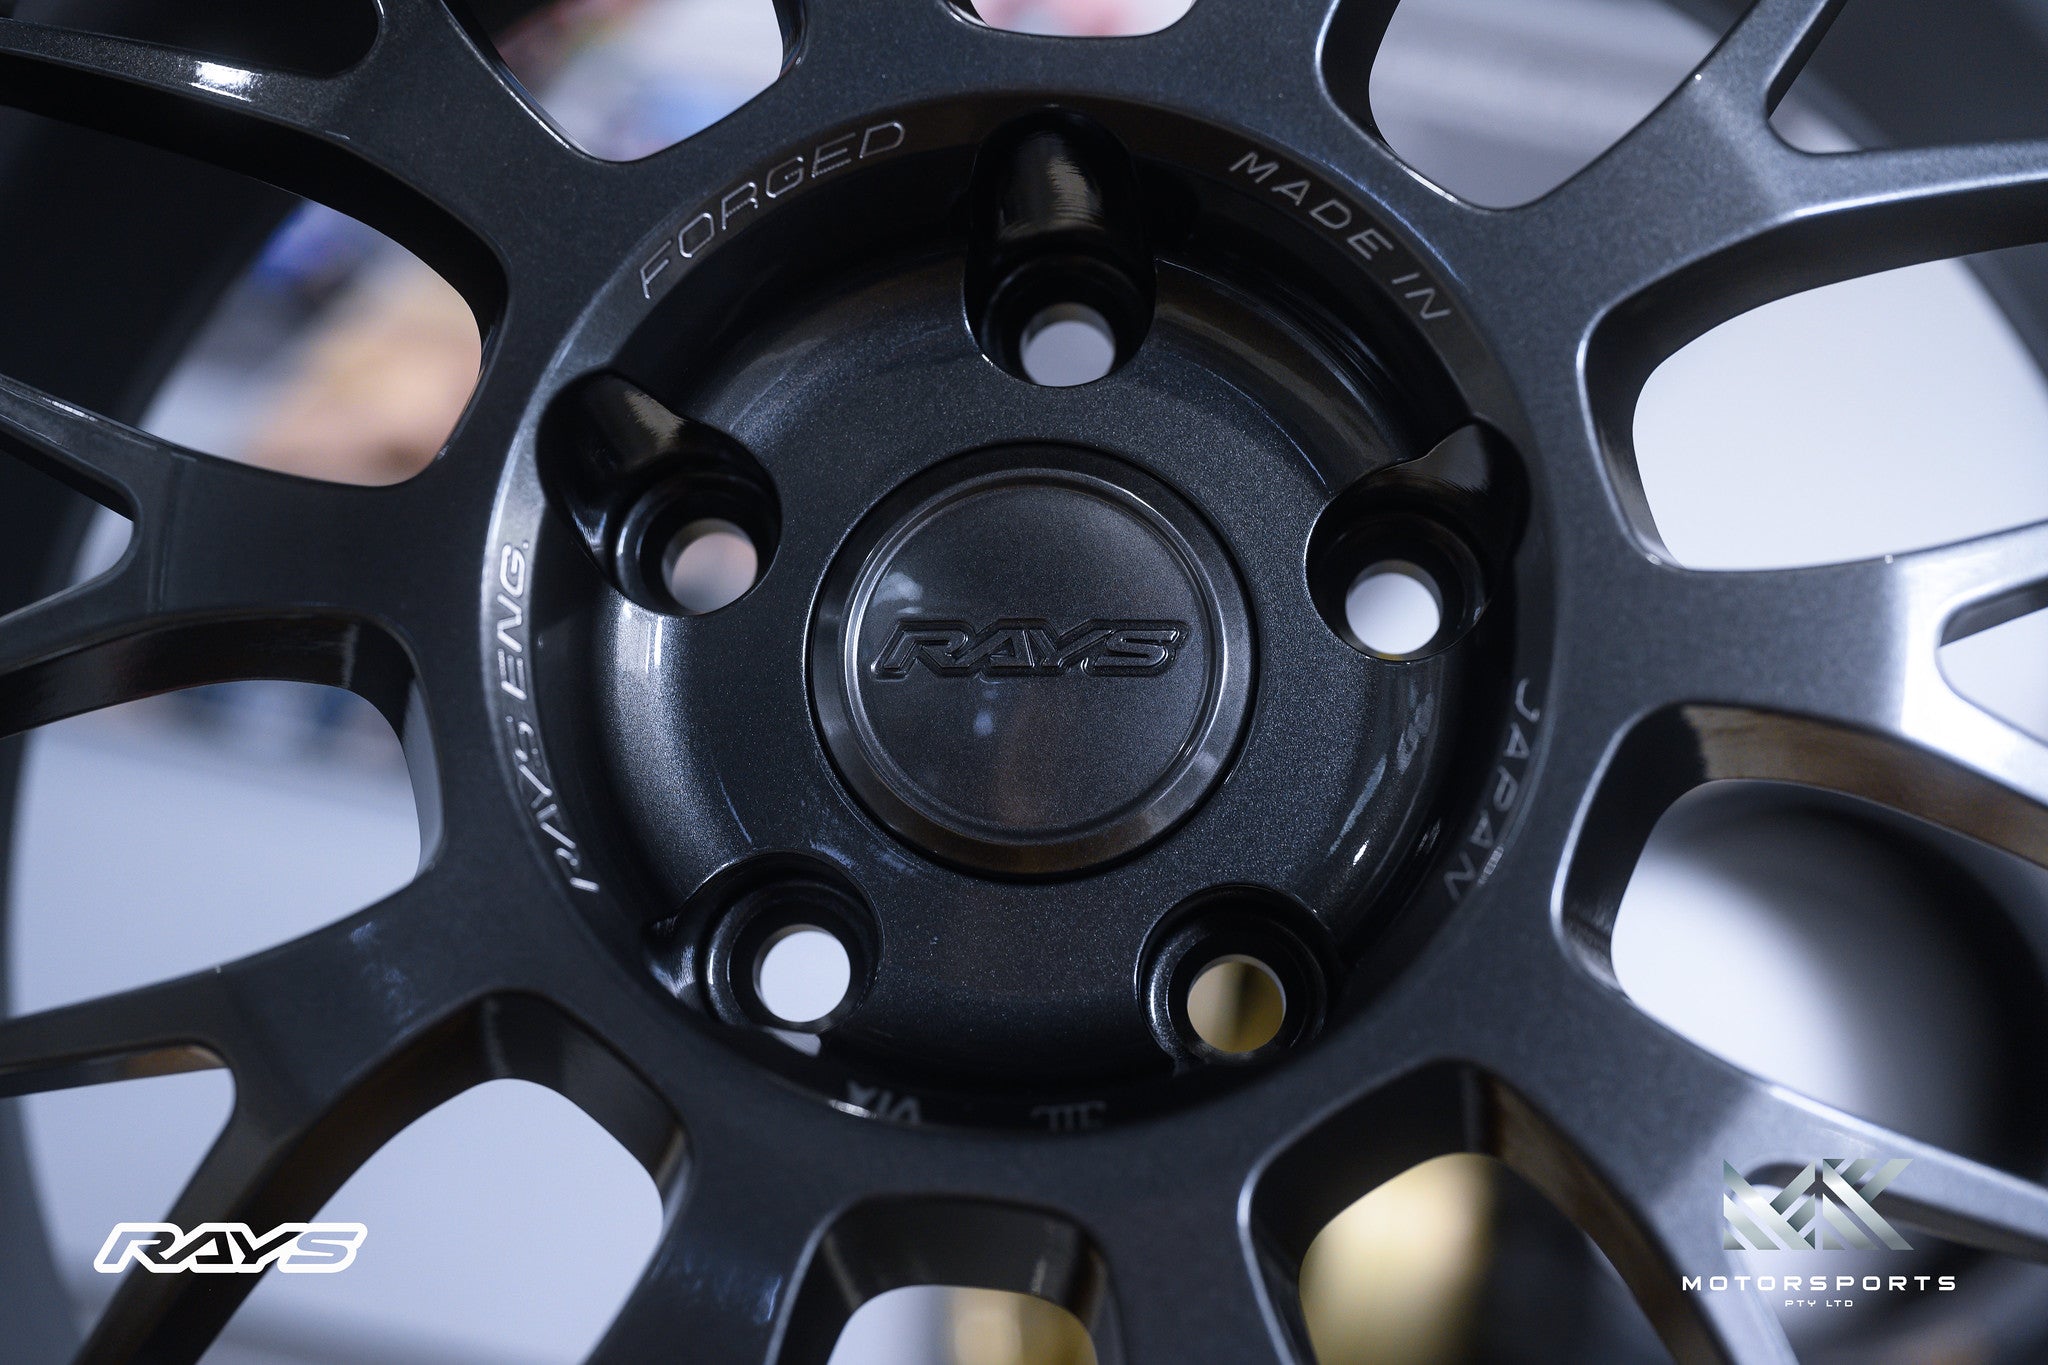 Volk Racing 21A - Premium Wheels from Volk Racing - From just $4090.00! Shop now at MK MOTORSPORTS